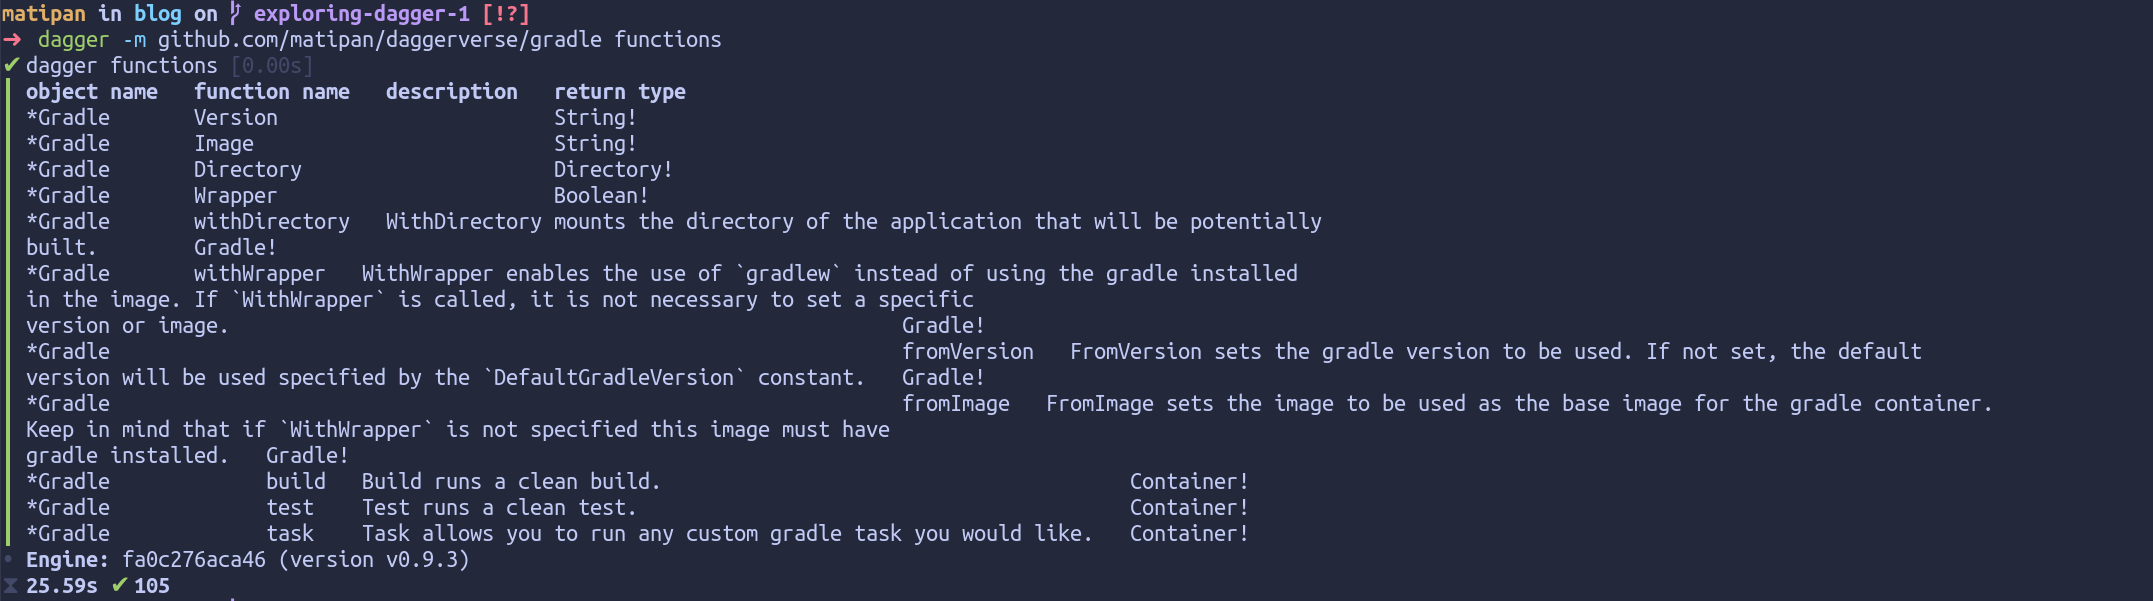 a terminal showing all the operations and their arguments that the Gradle module supports